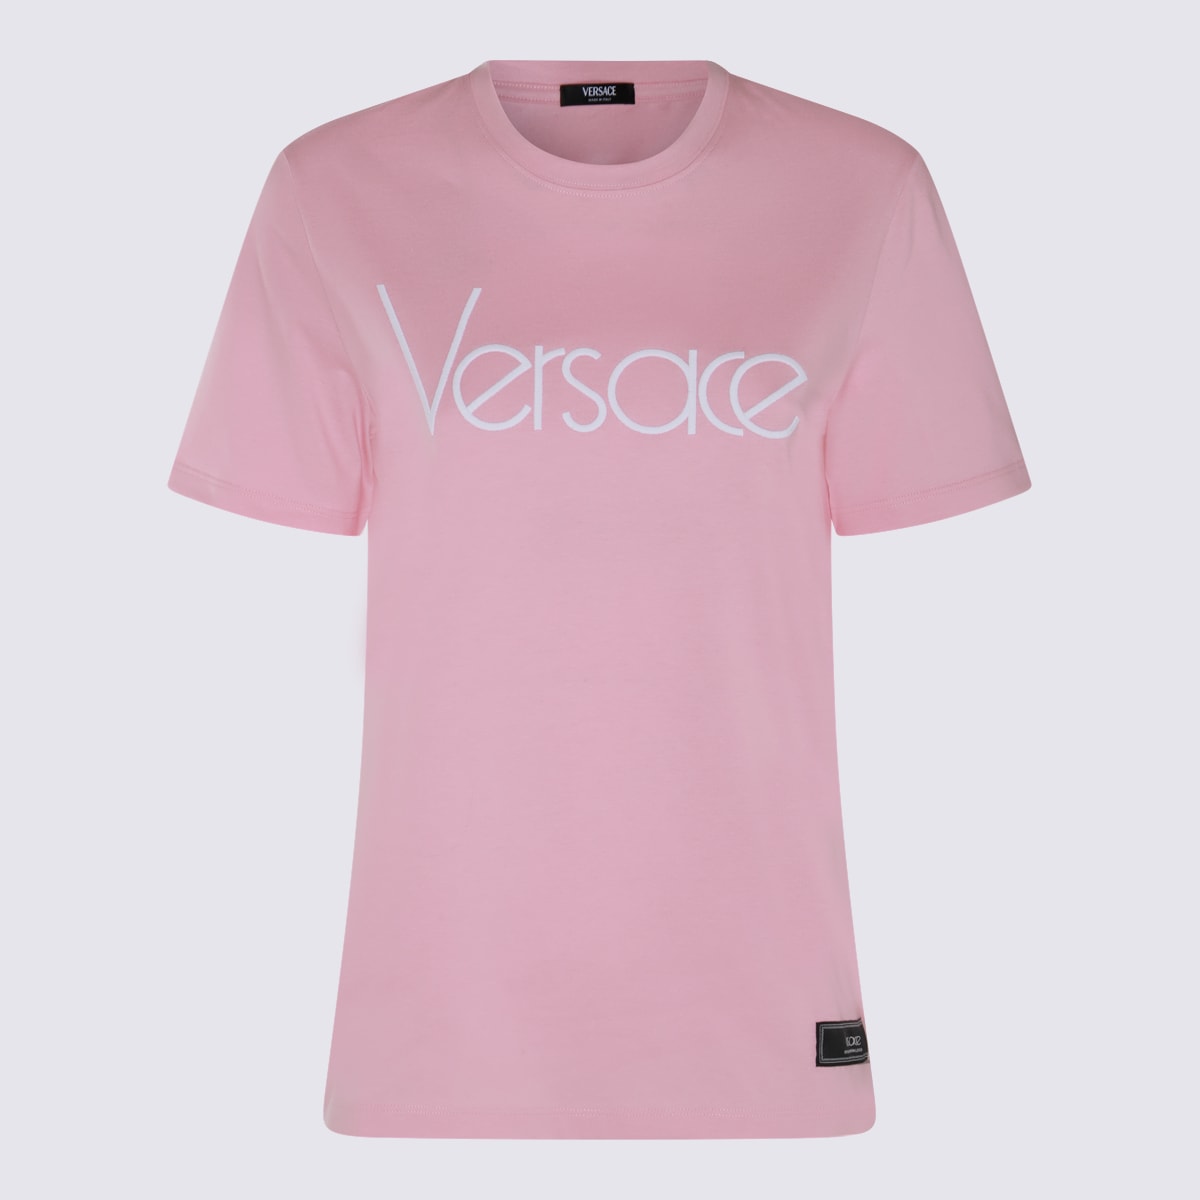 VERSACE PINK AND WHITE COTTON T-SHIRT